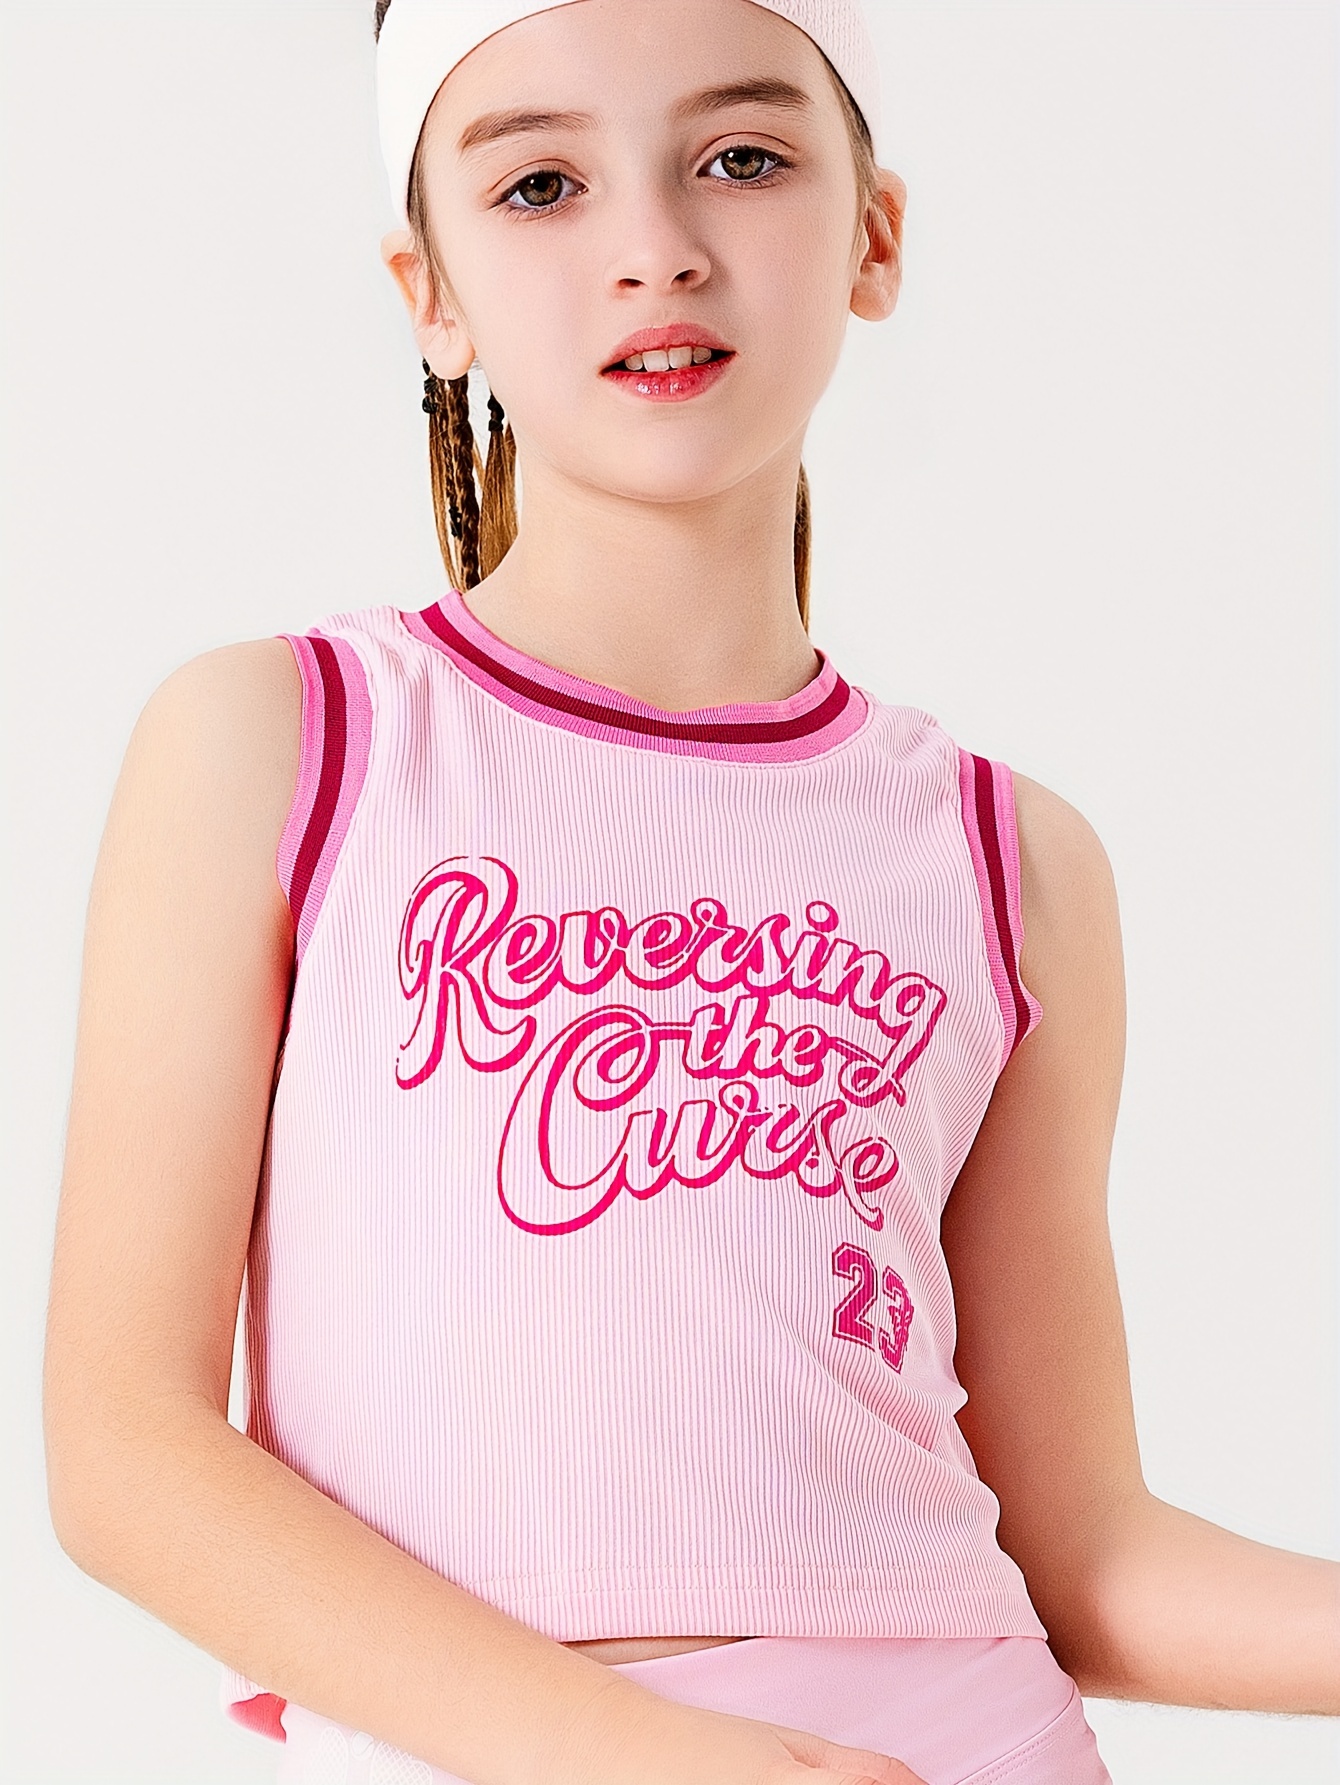 Teen Girls Letter Print Padding Support Sports Camisole Tops